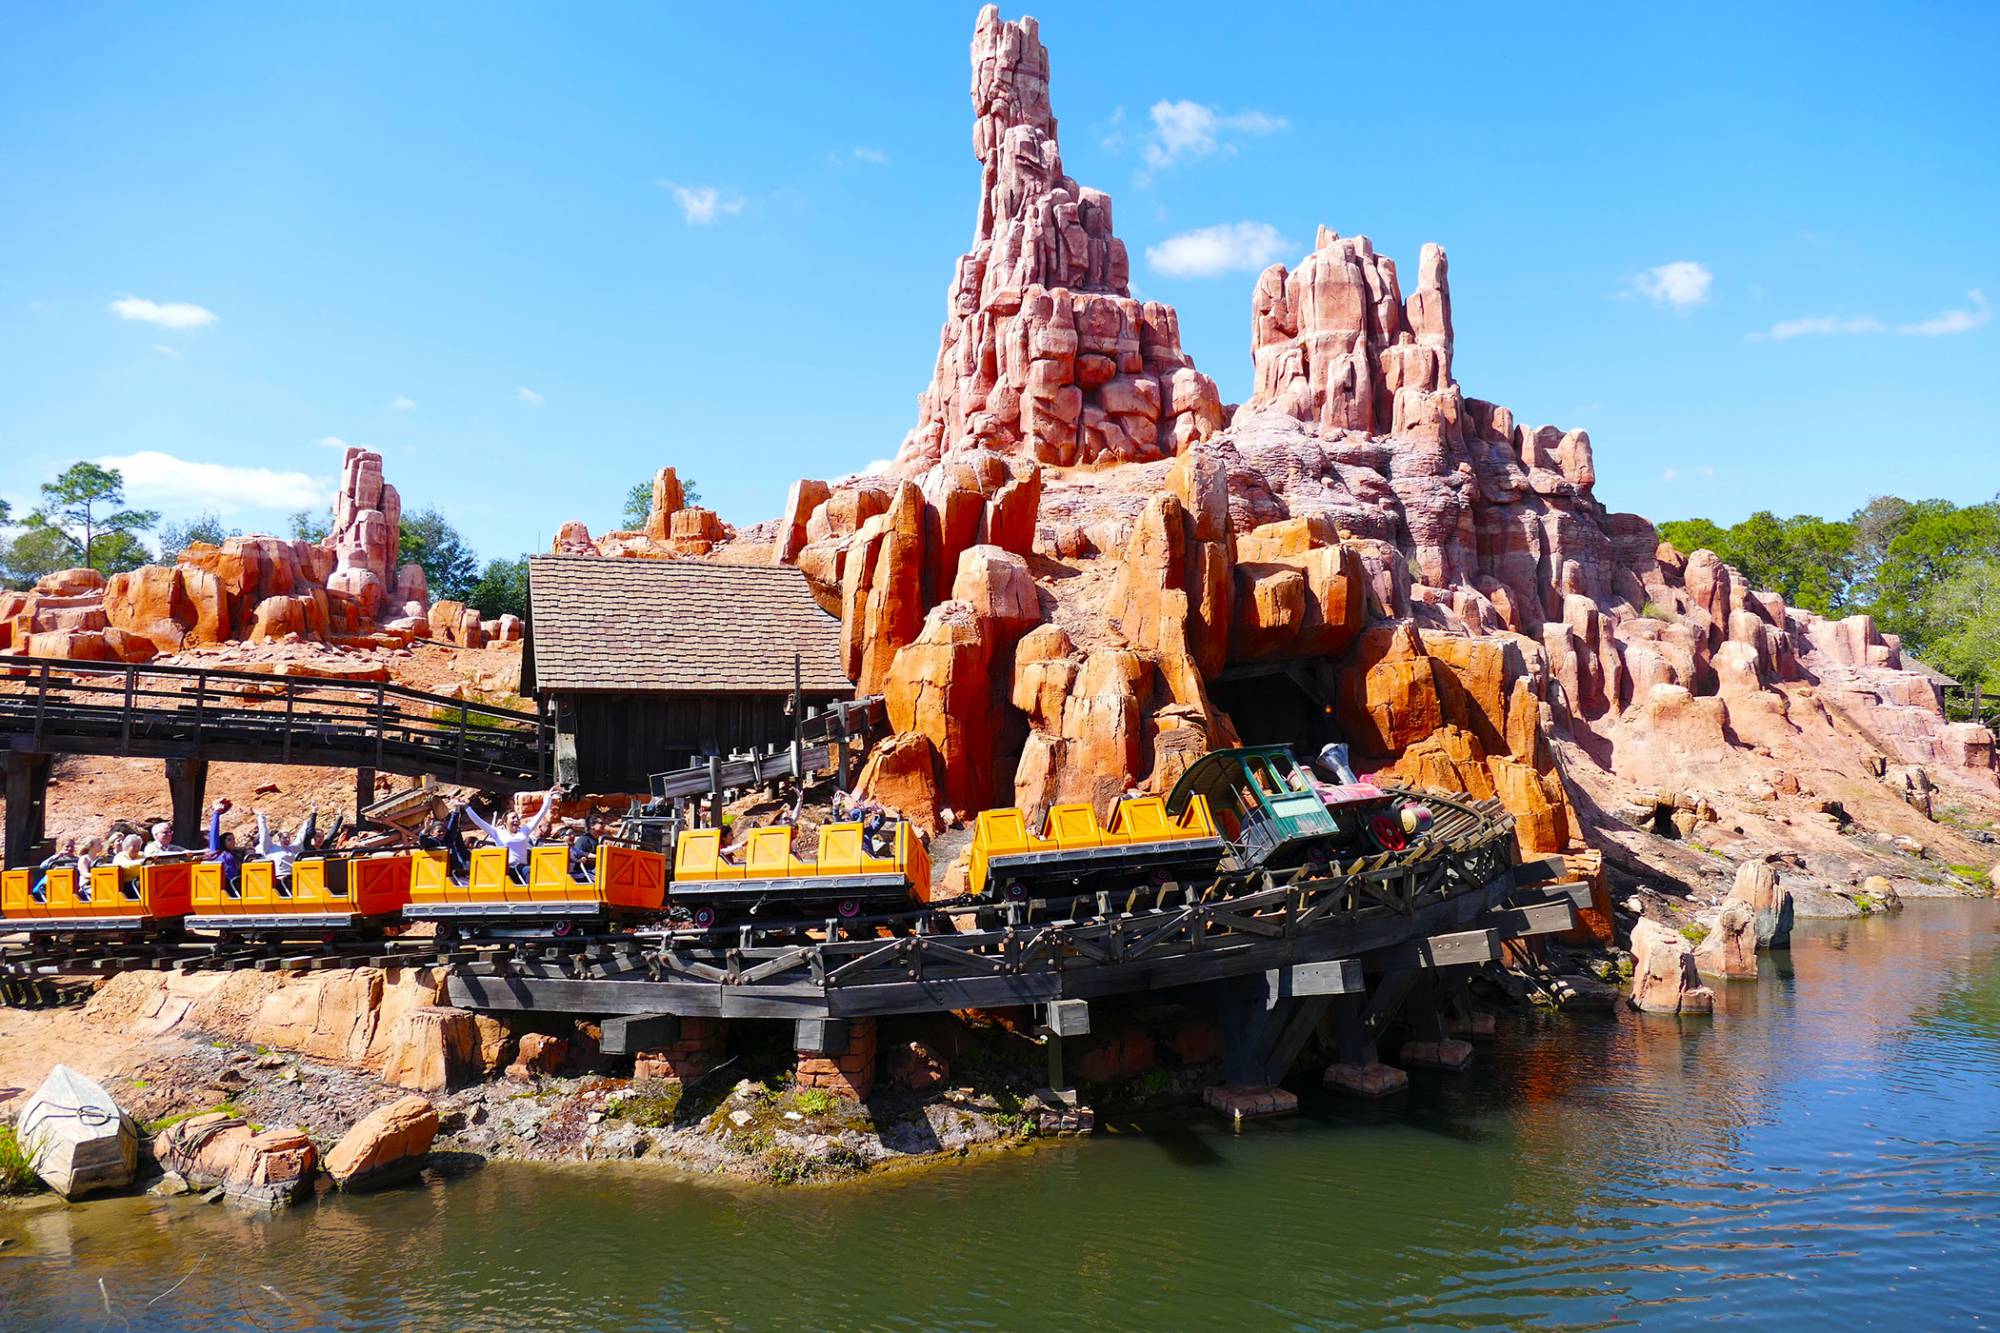 Big Thunder Mountain as seen from the Riverboat